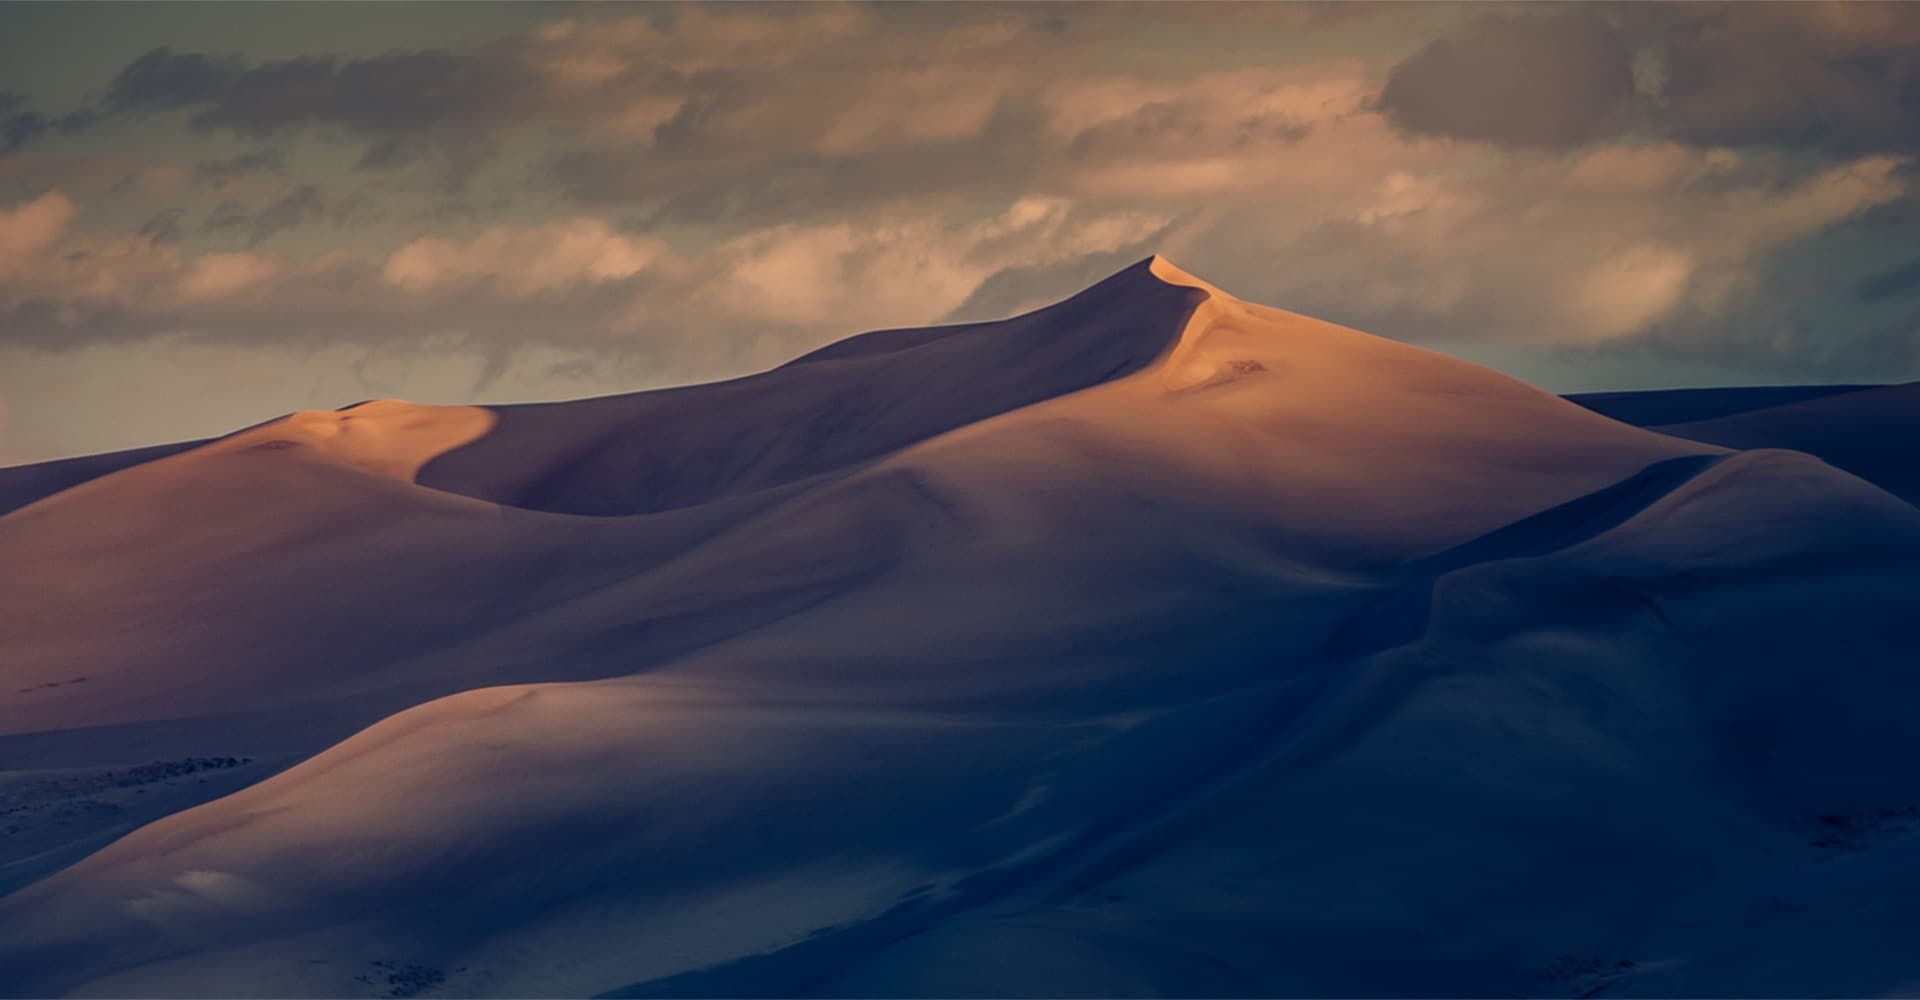 High Dune at sunrise in Great Sand Dunes National Park, Colorado